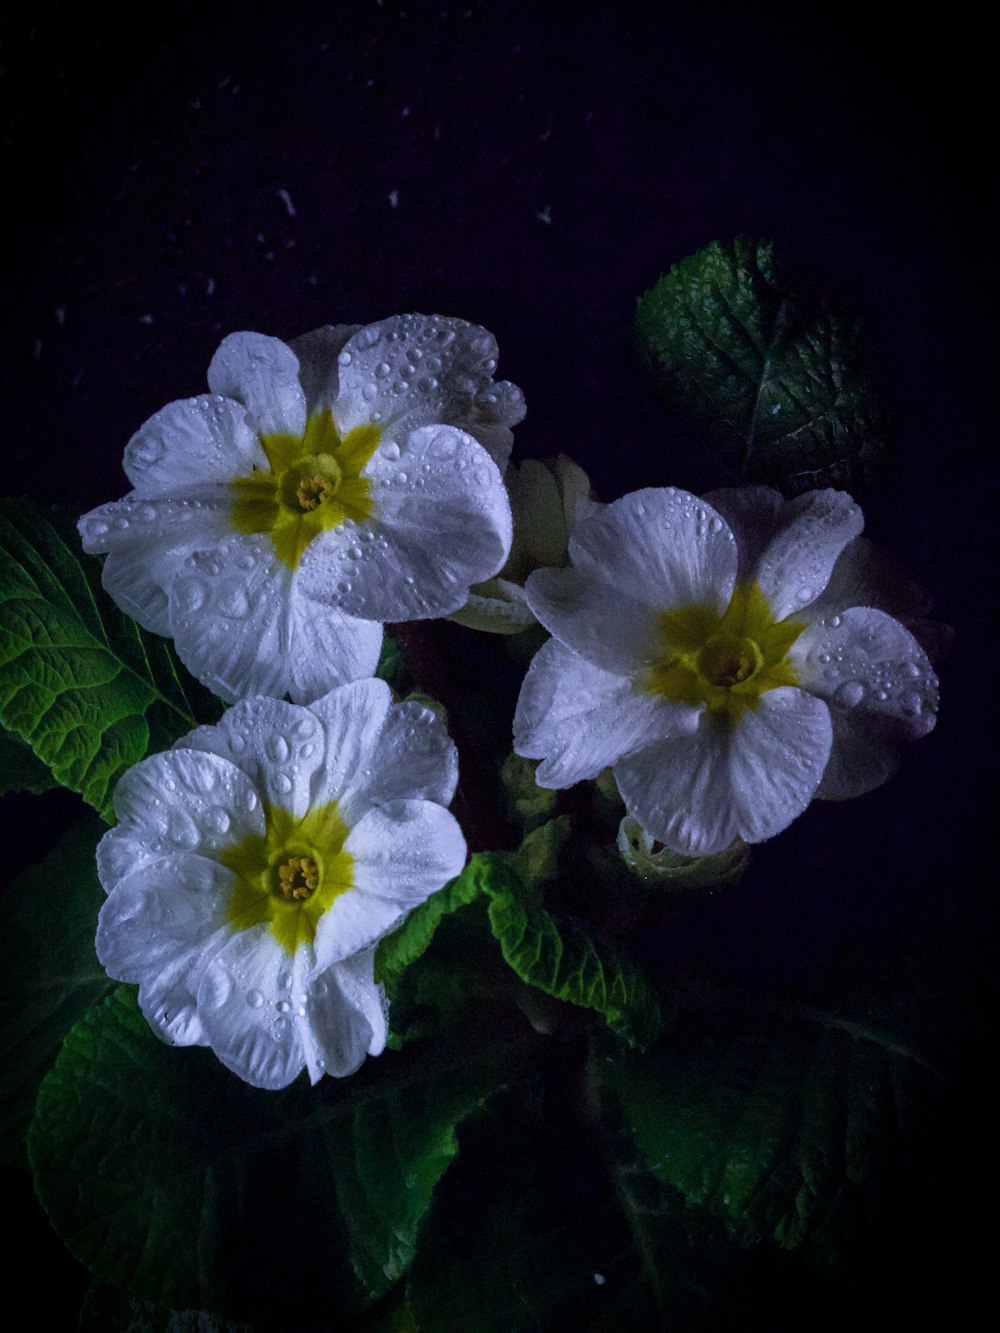 three white flowers with green leaves on a dark background